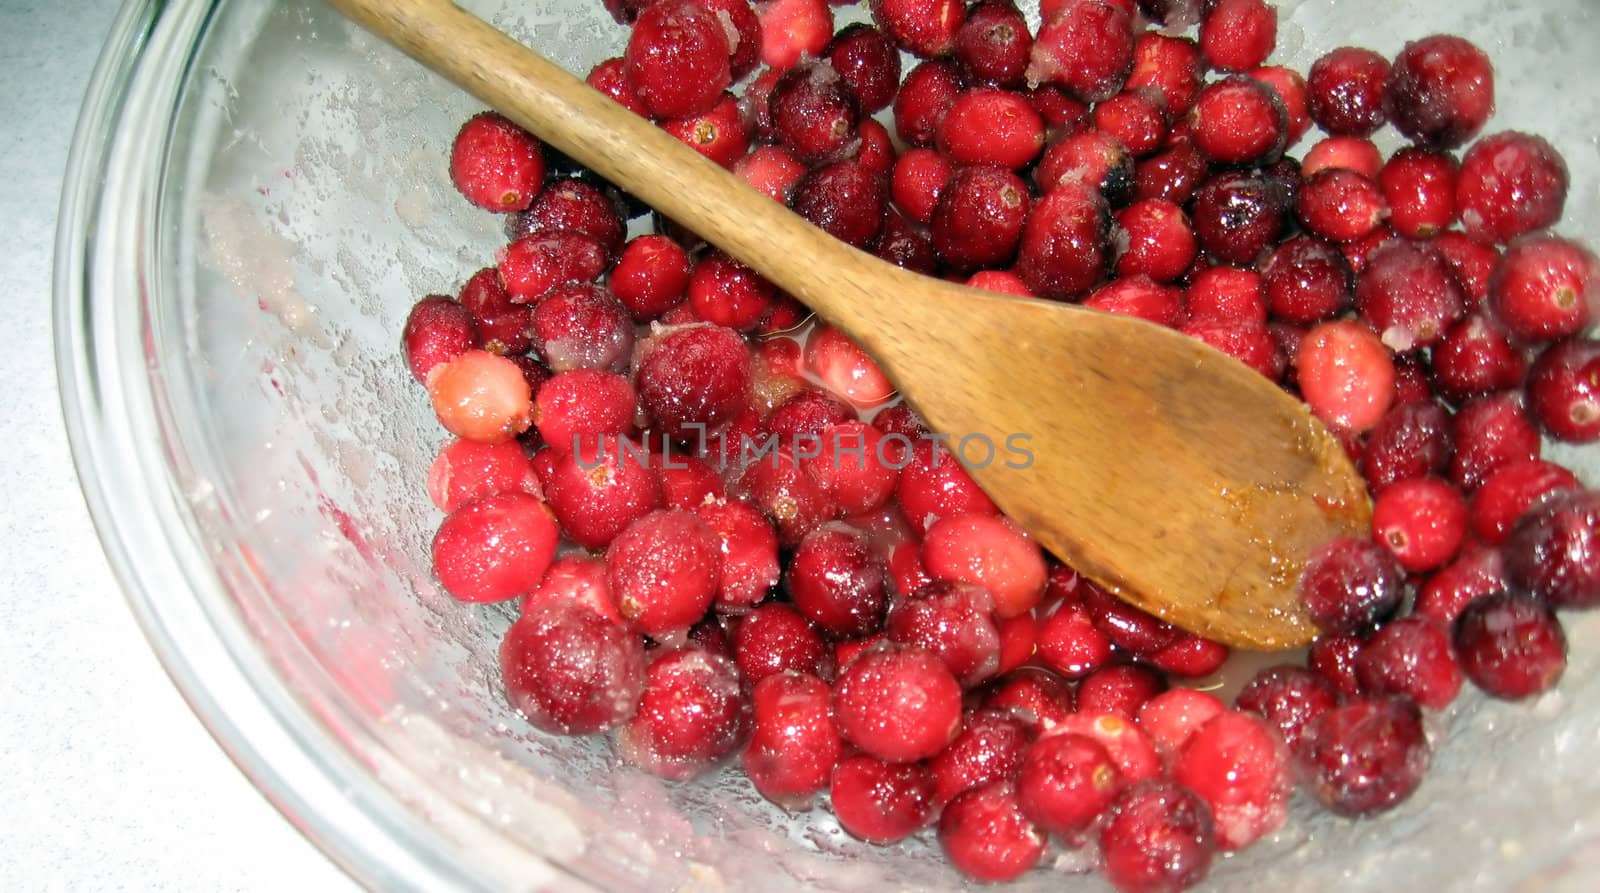 prior to cooking, these fresh cranberries are mixed with sugar with an antique wood spoon